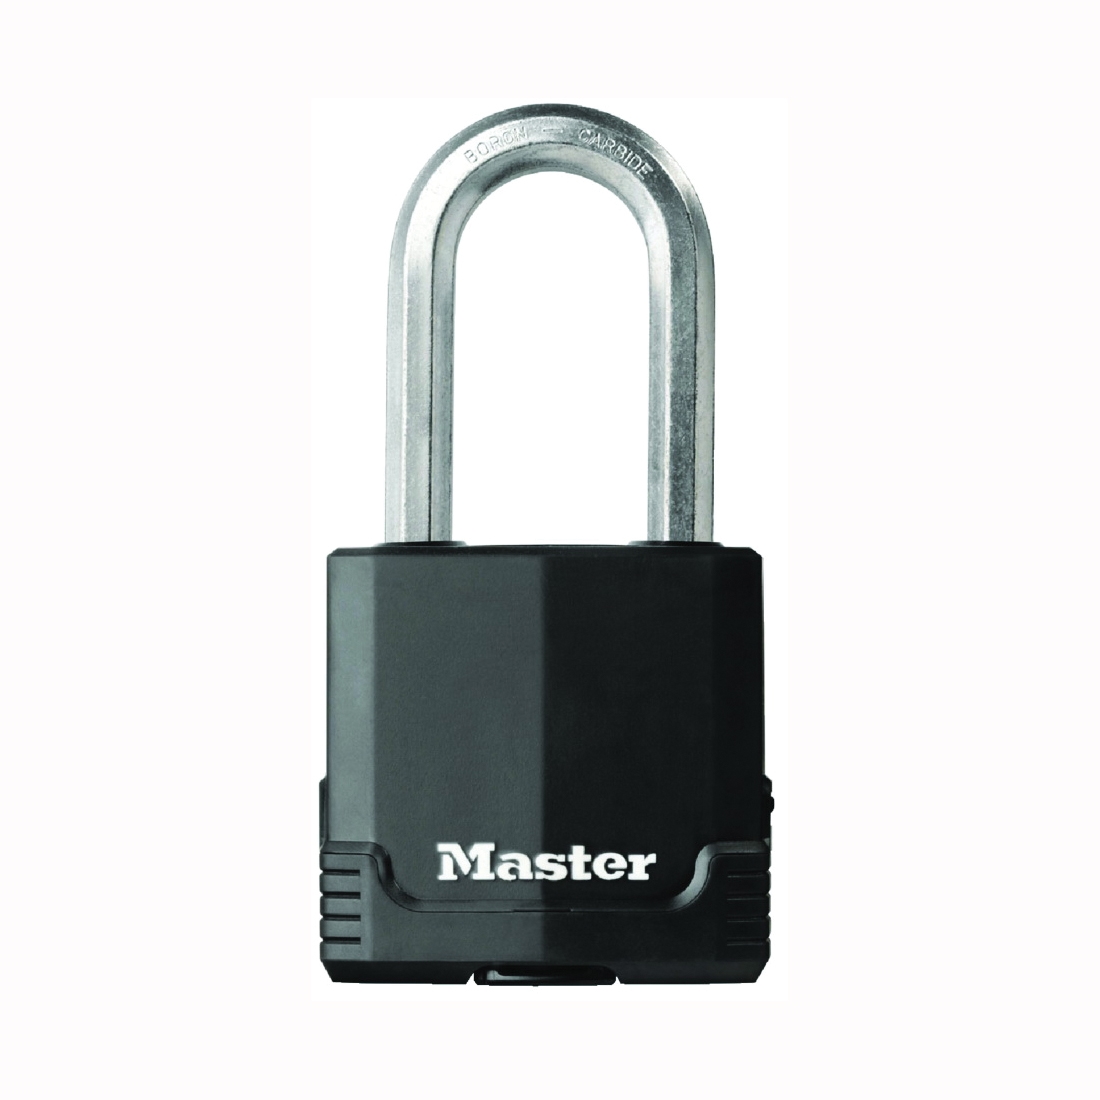 Master Lock Magnum M515XKADLH Keyed Padlock, Different Key, 3/8 in Dia Shackle, 2 in H Shackle, Stainless Steel Body - 1